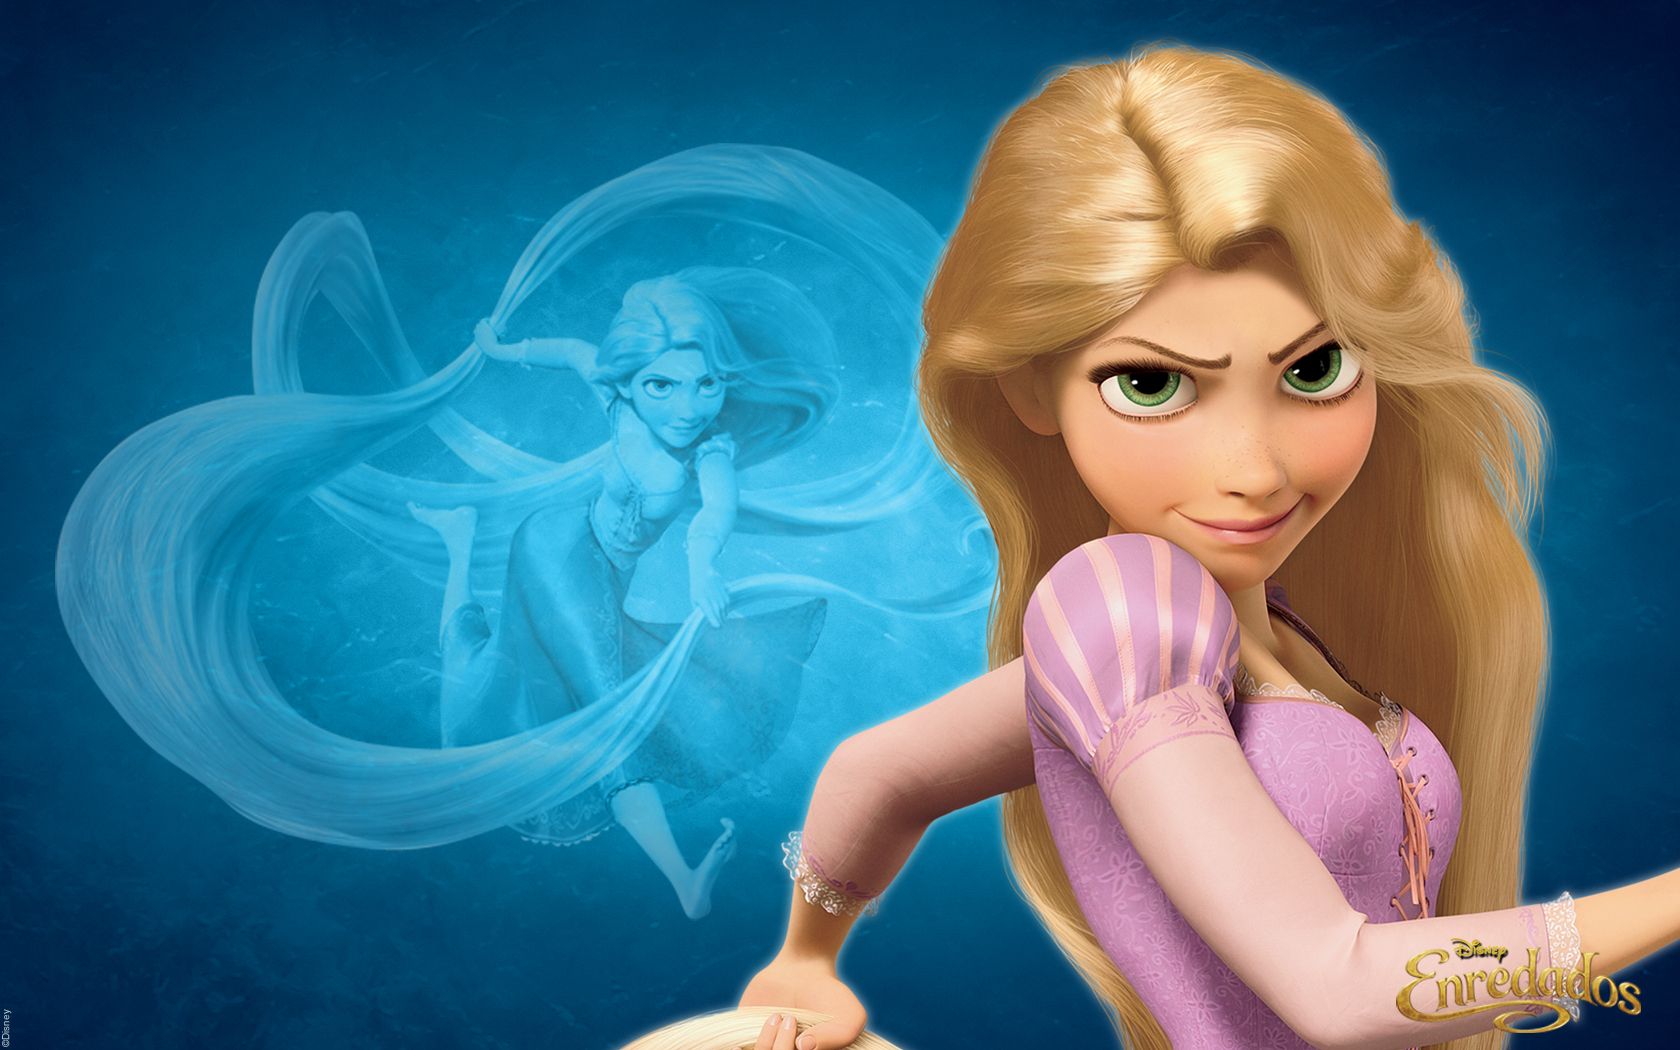 A beautiful princess from the disney movie tangled - Rapunzel